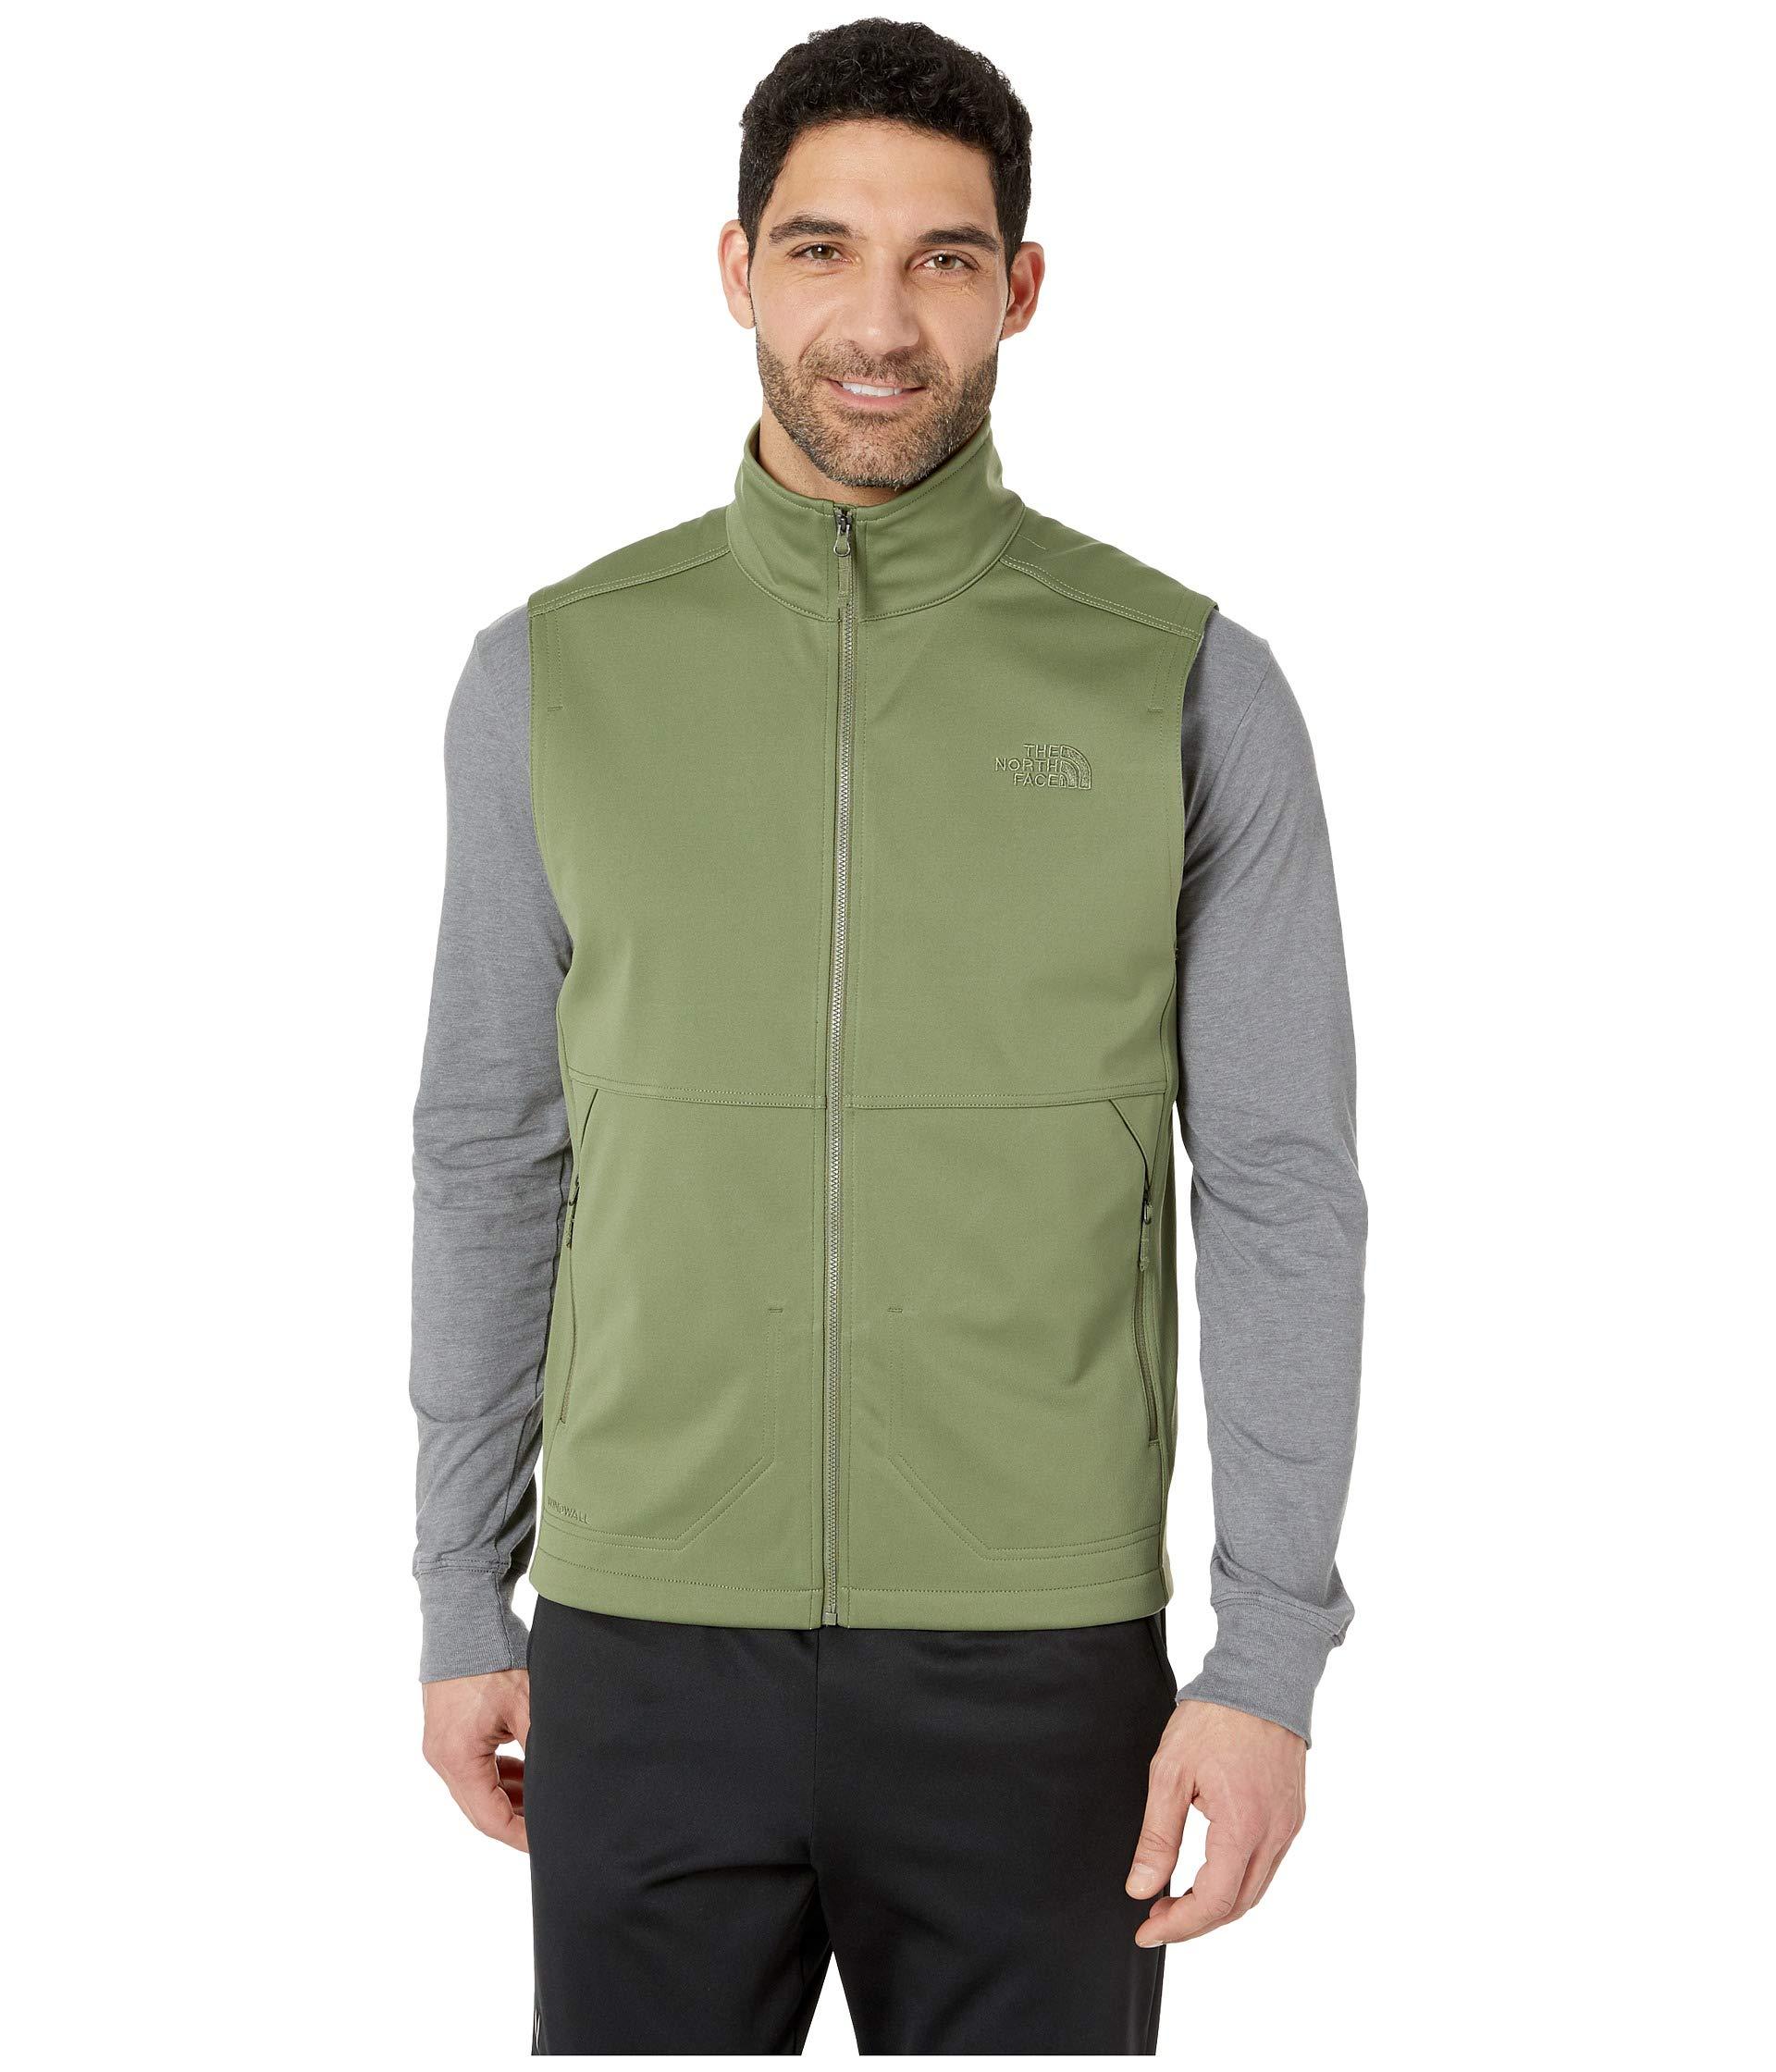 The North Face Fleece Apex Canyonwall Vest in Green for Men - Lyst